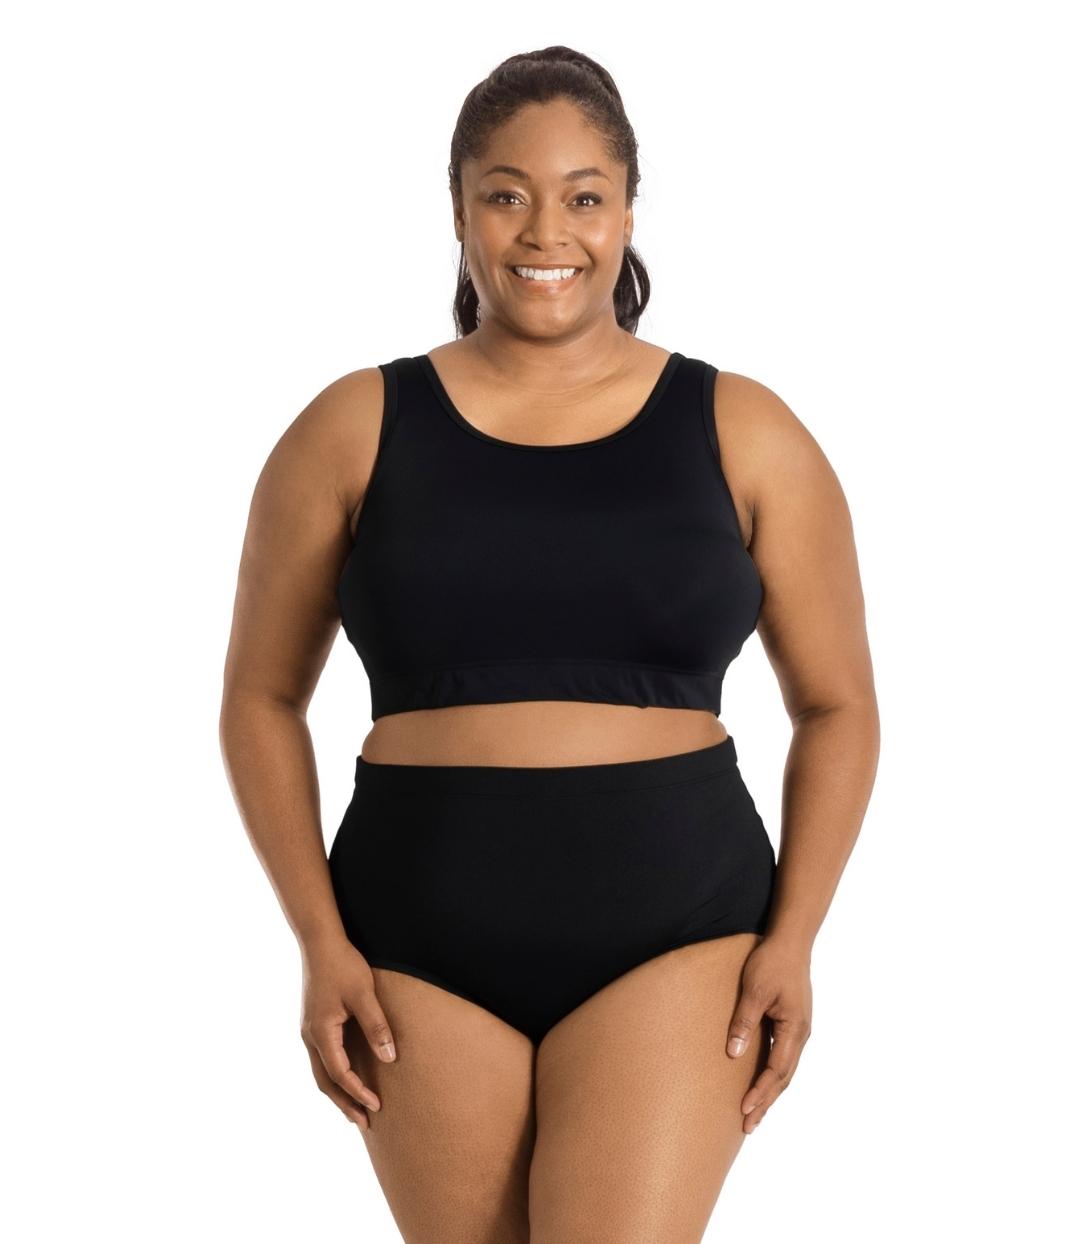 Size 26-28 Plus Size Intimate Apparel, Lingerie & Swimsuits